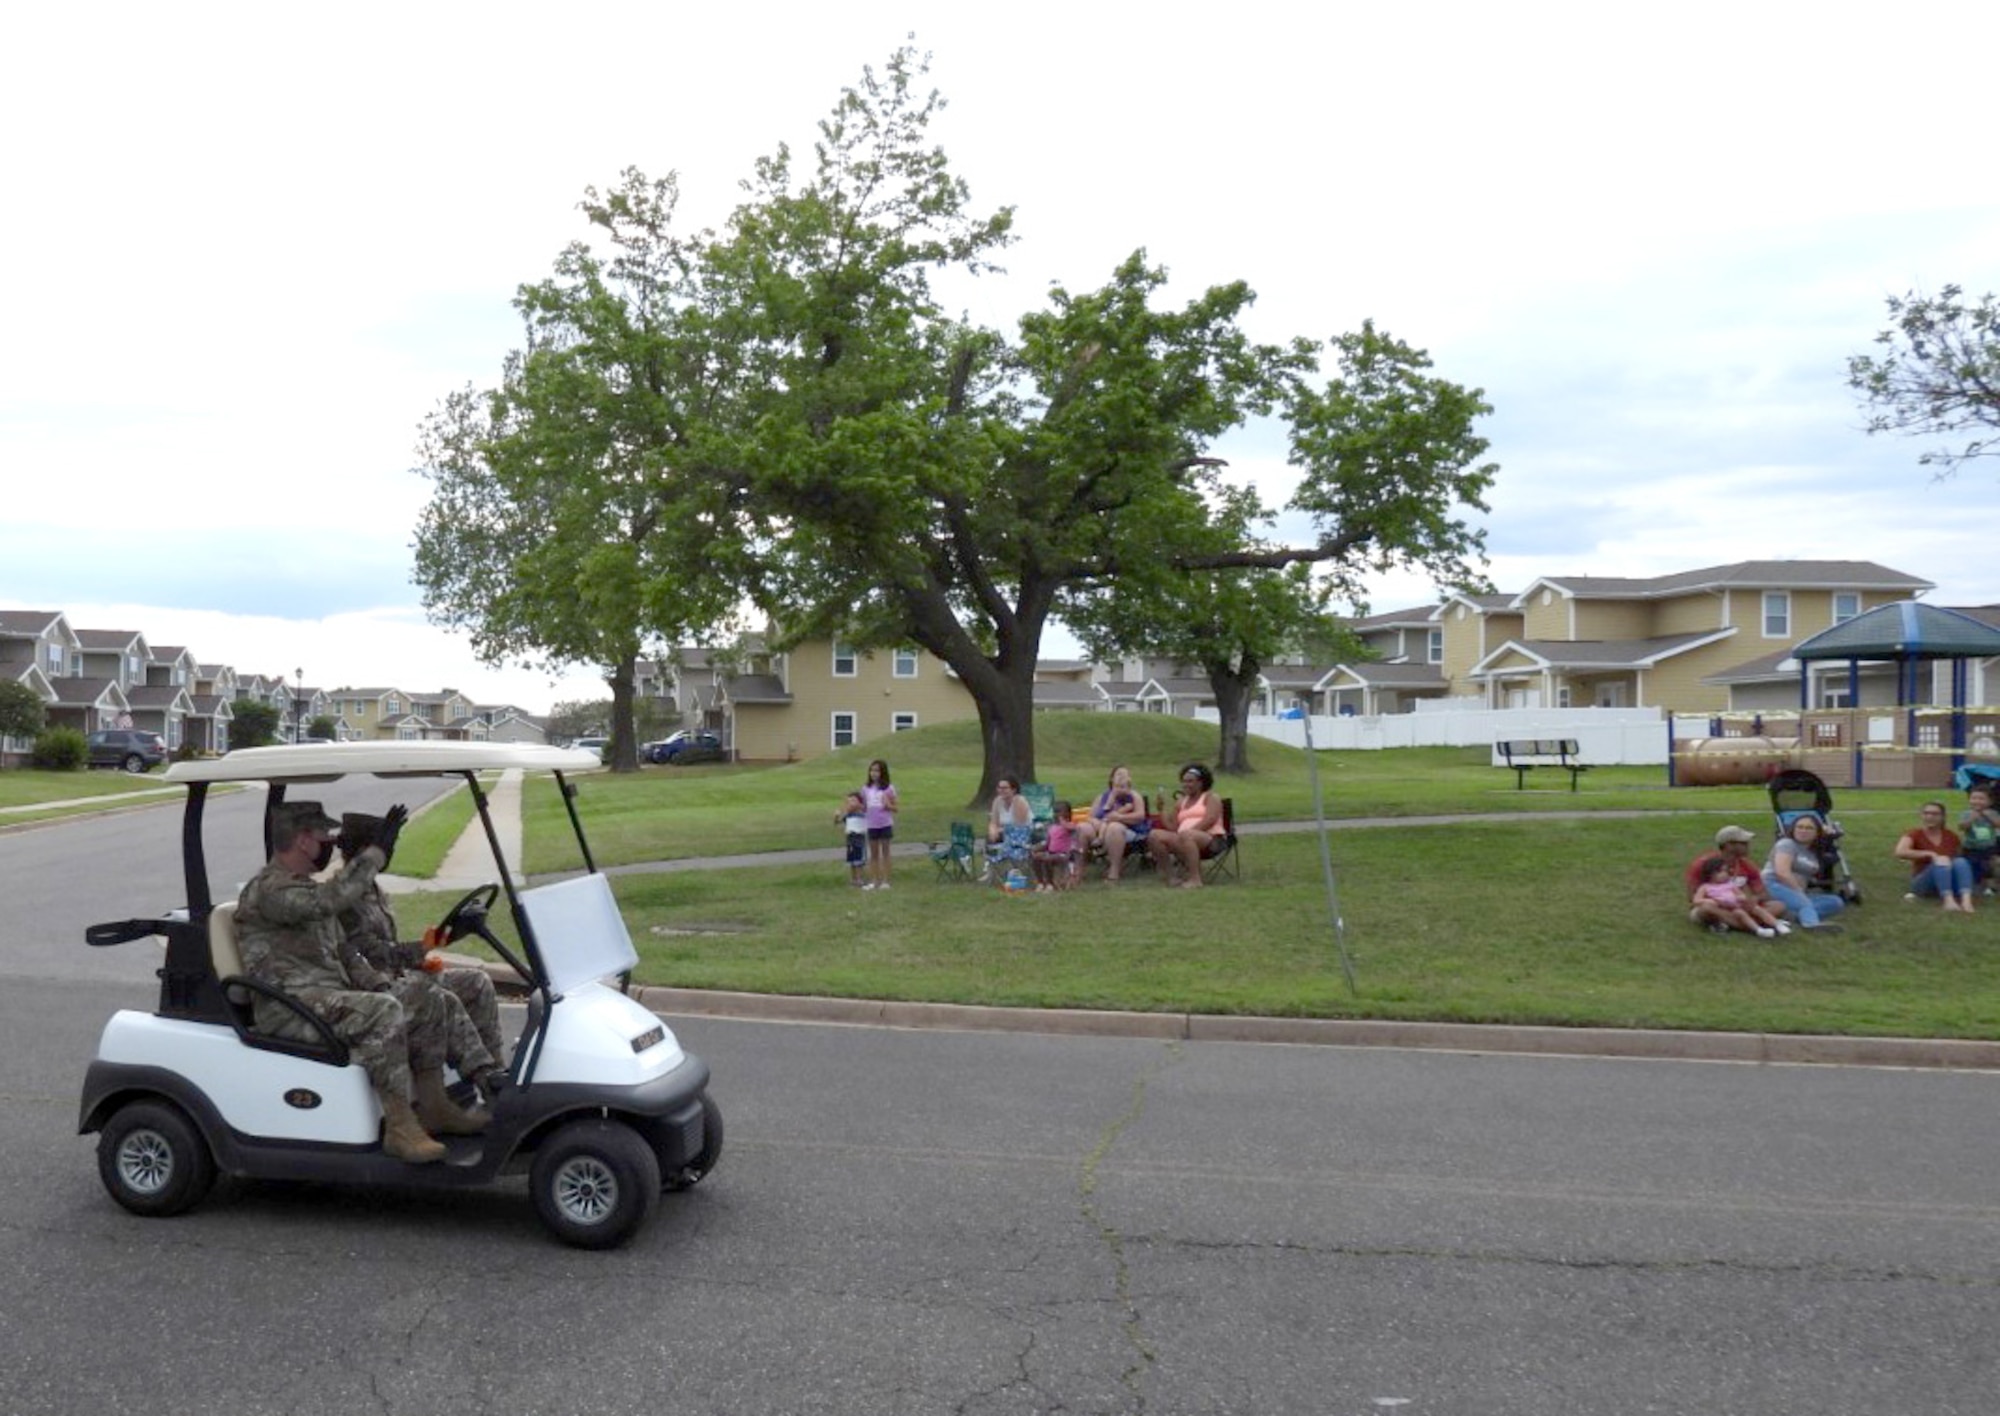 Col. Paul Filcek, 72nd Air Base Wing and Tinker installation commander, waves at base housing residents during the Chalk It Up Parade on May 27. Filcek was joined by several other Tinker leaders, members of base helping agencies, security forces and fire personnel along the parade route.